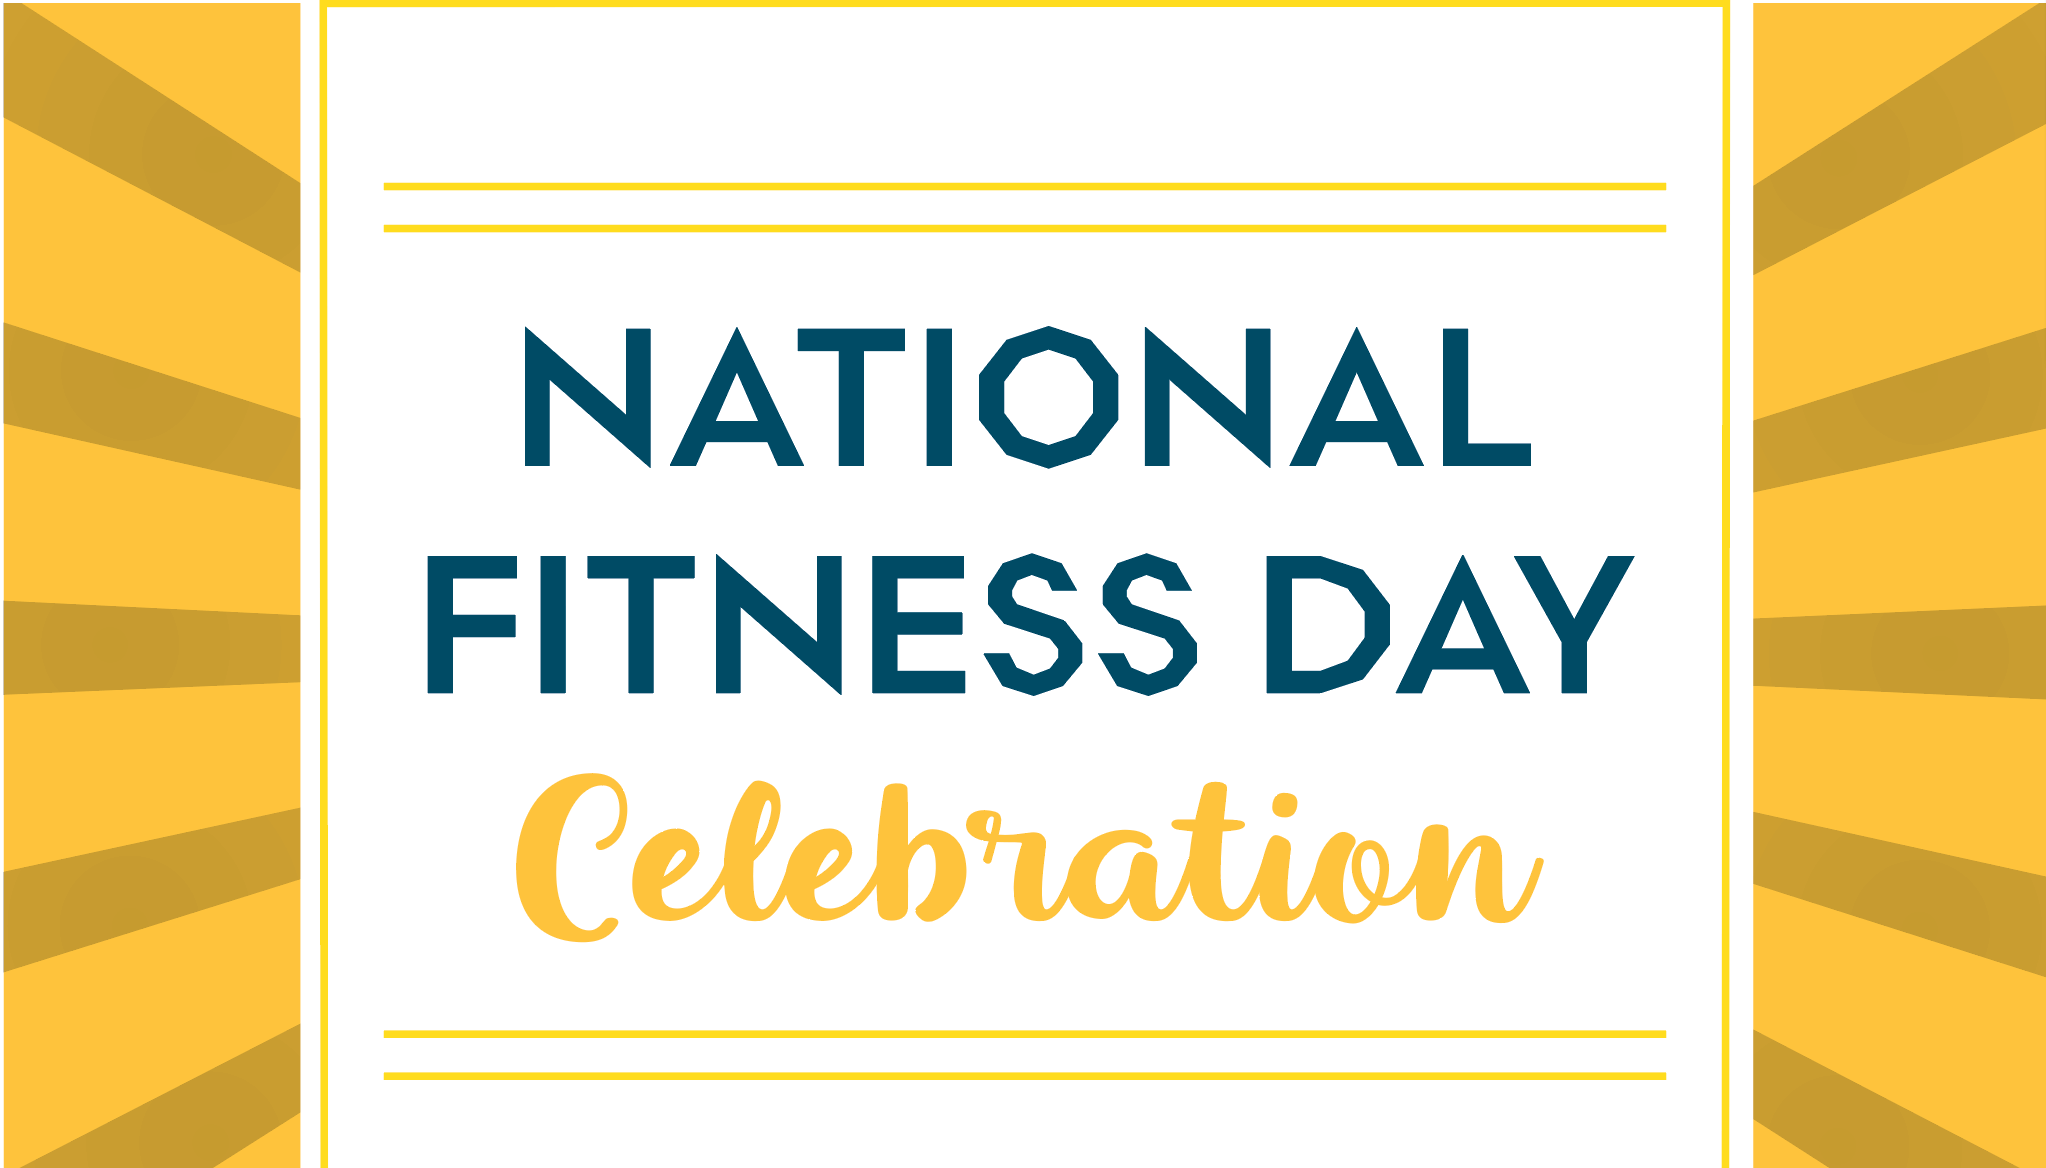 Celebrate National Fitness Day with CHF!